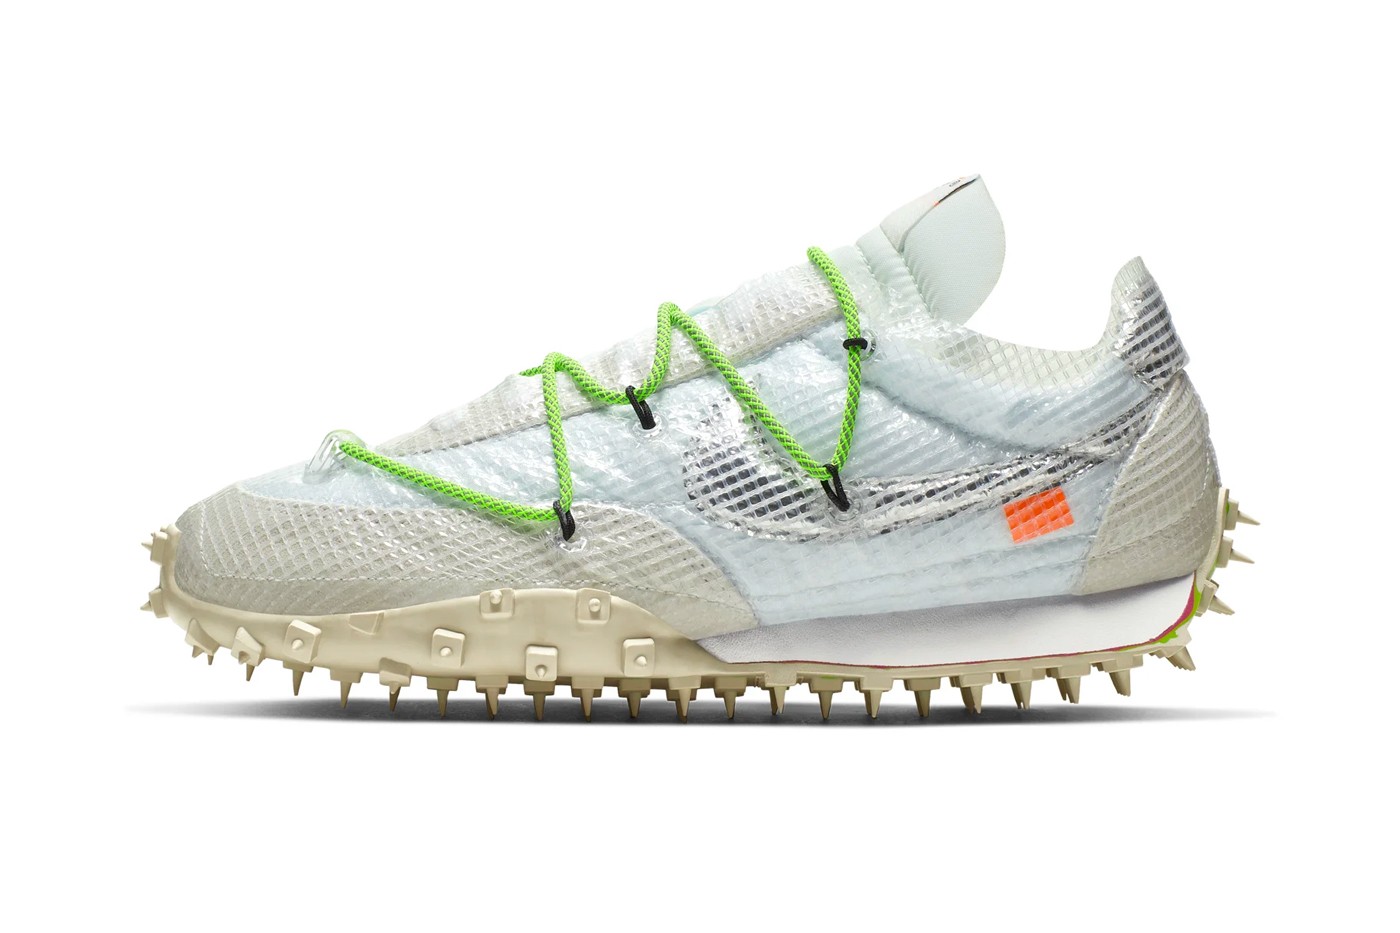 nike-off-white-waffle-racer-launch-date-december-12-2019-CD8180-100